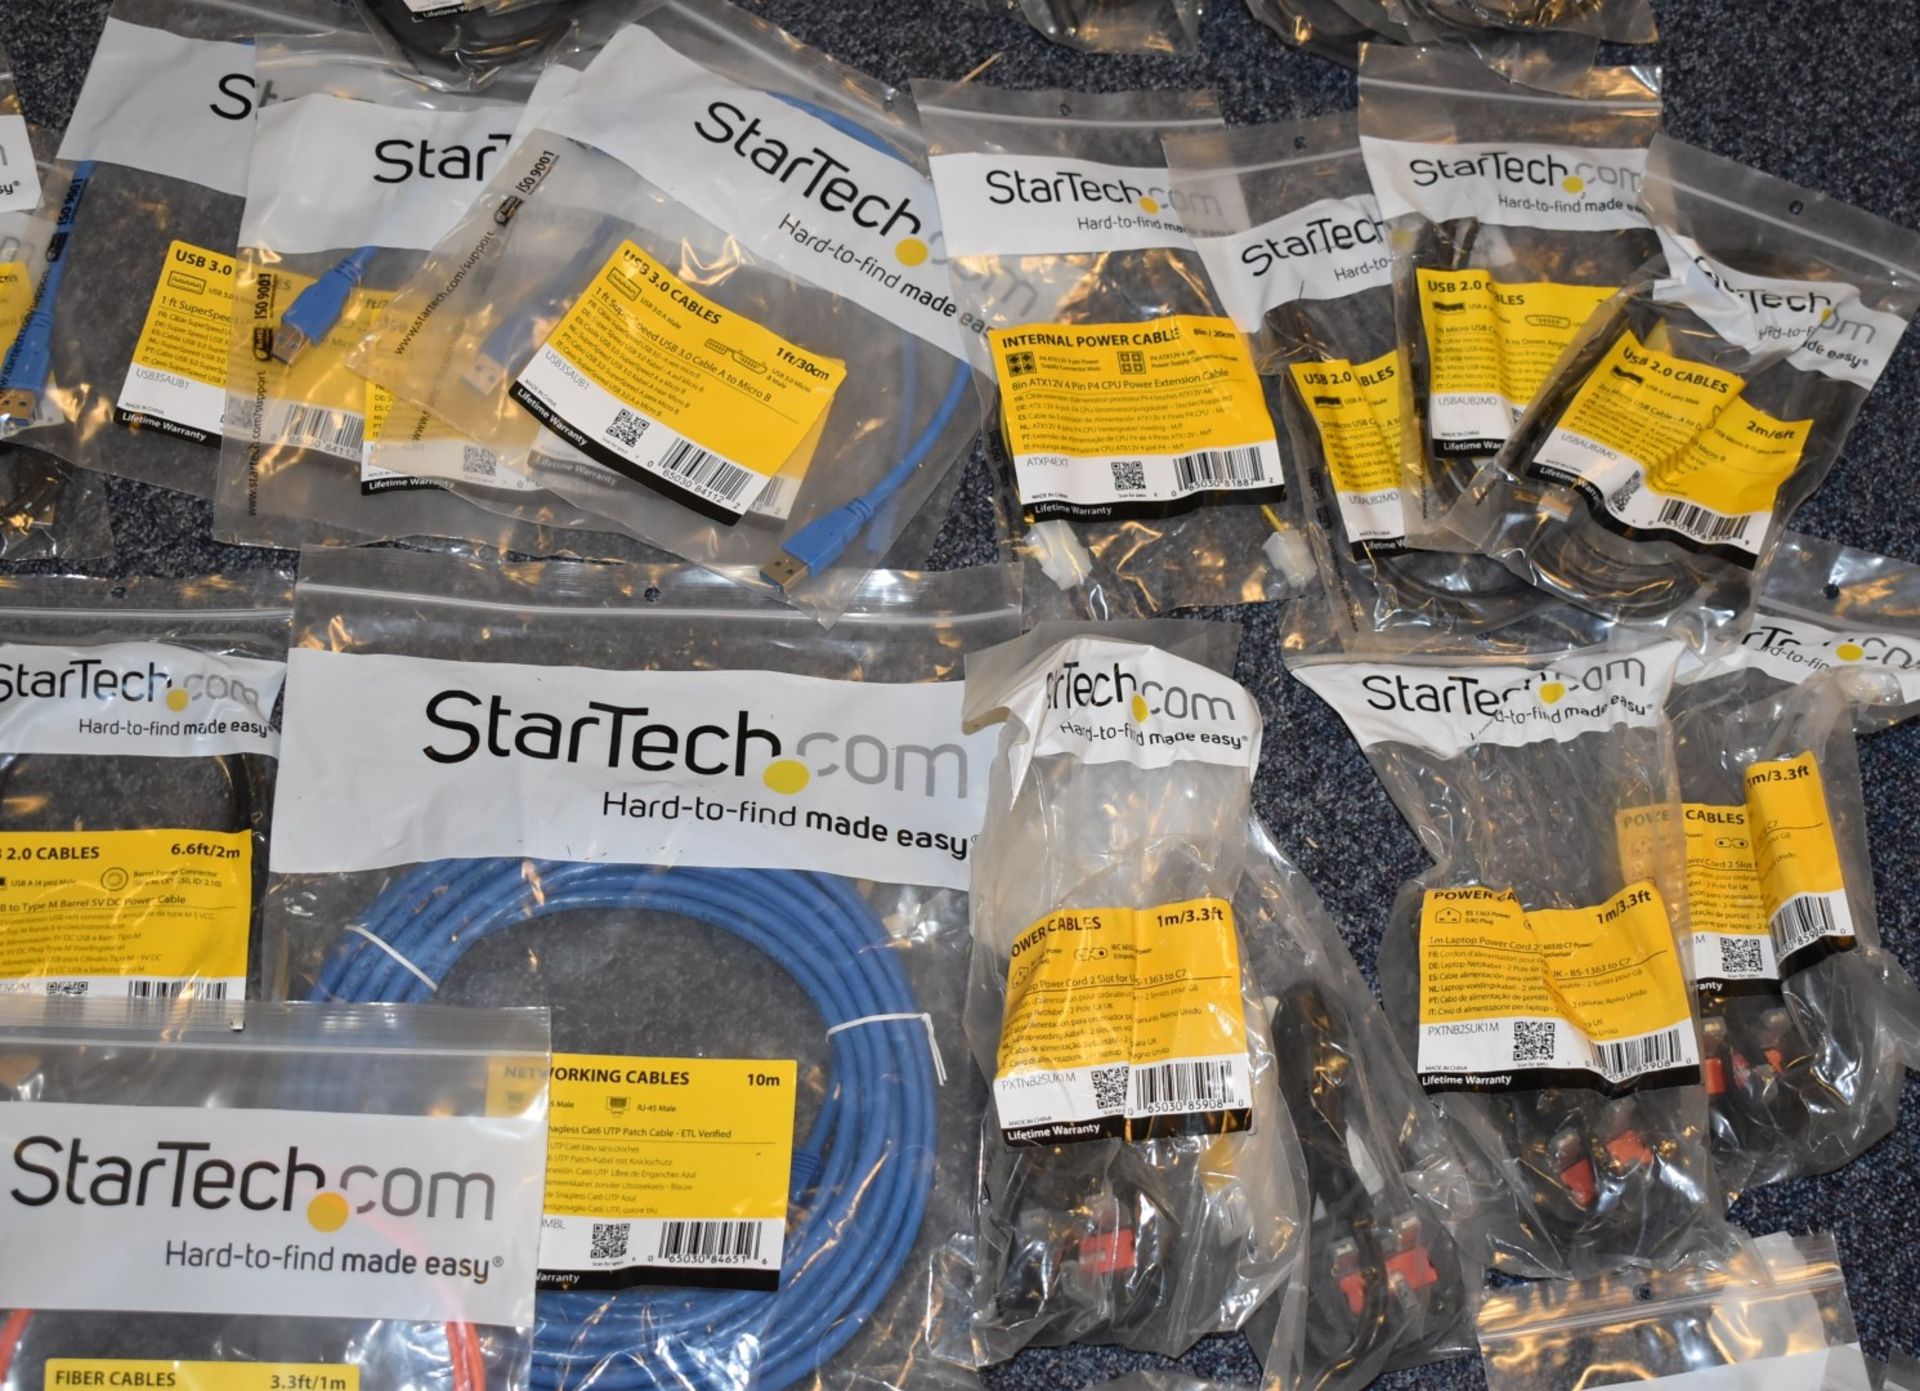 177 x Assorted StarTech Cables - Huge Lot in Original Packing - Various Cables Included - Image 35 of 50